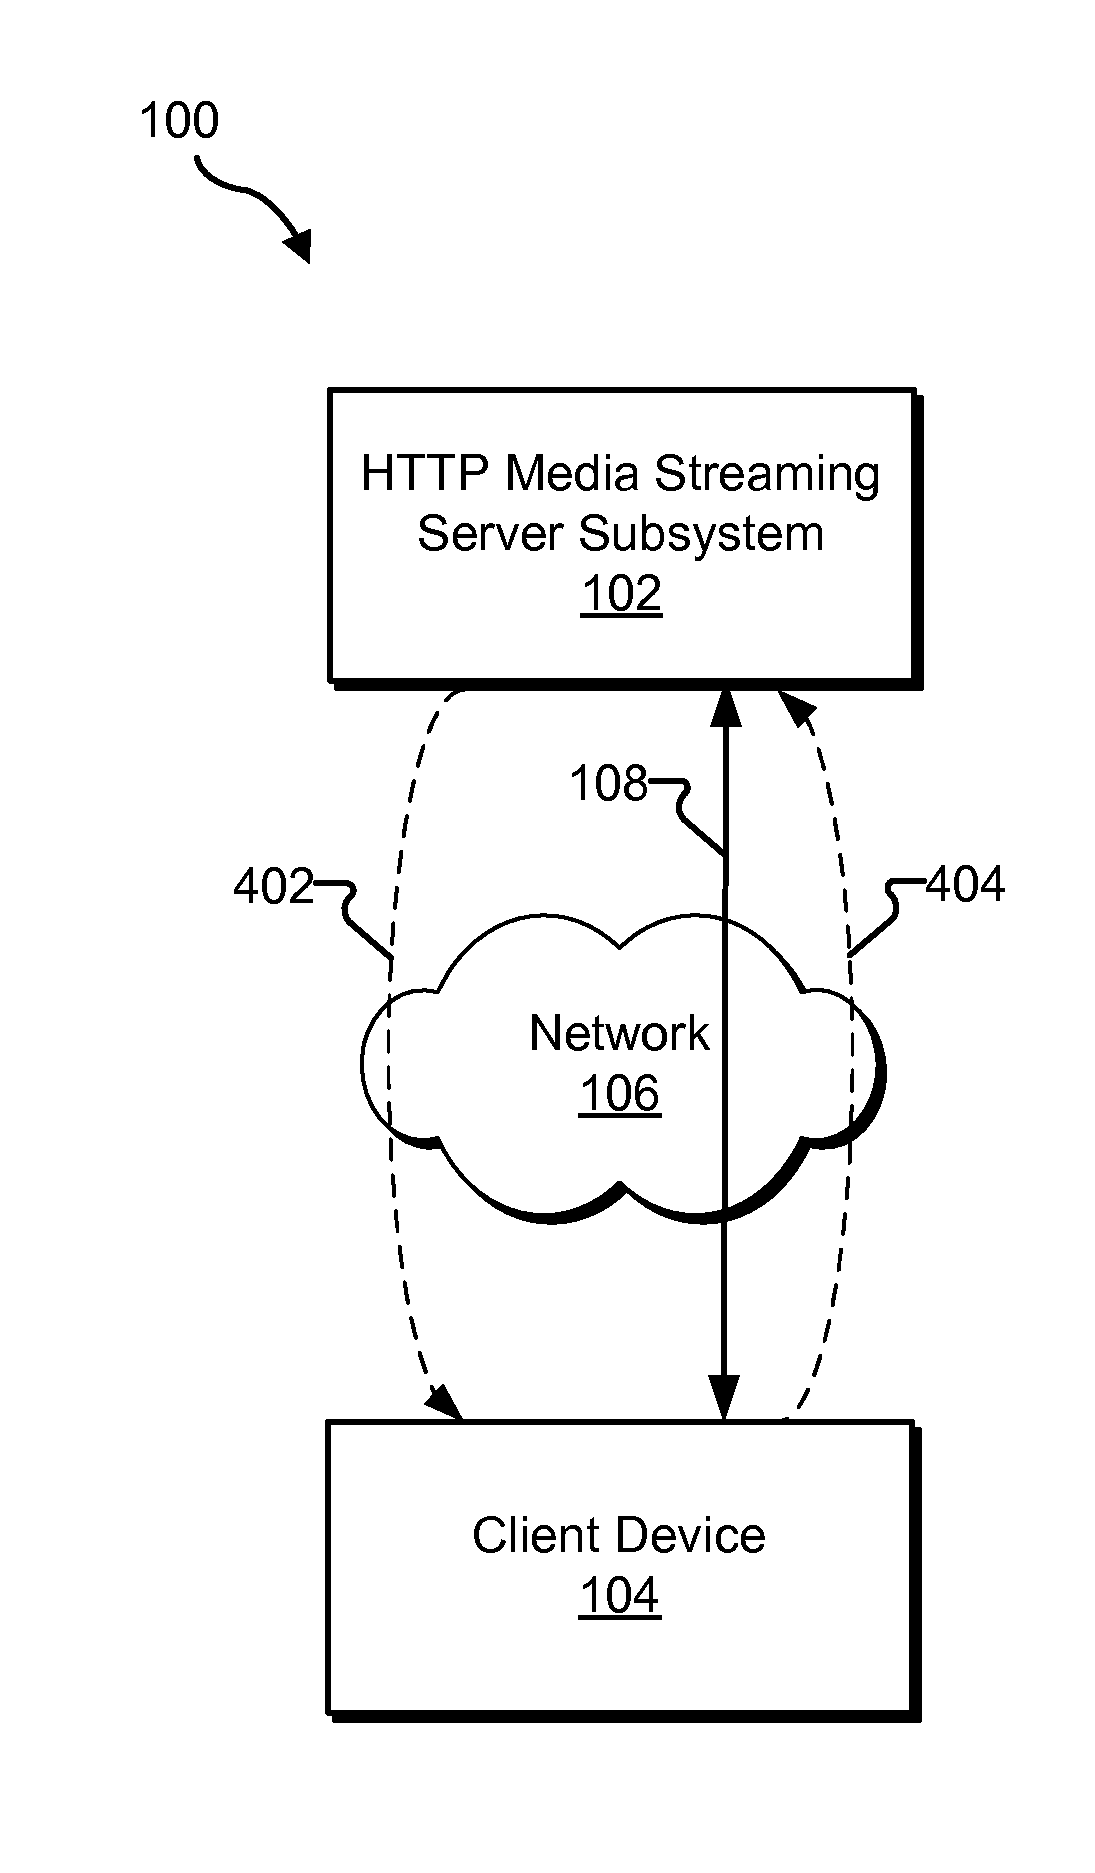 Adaptive hypertext transfer protocol ("http") media streaming systems and methods